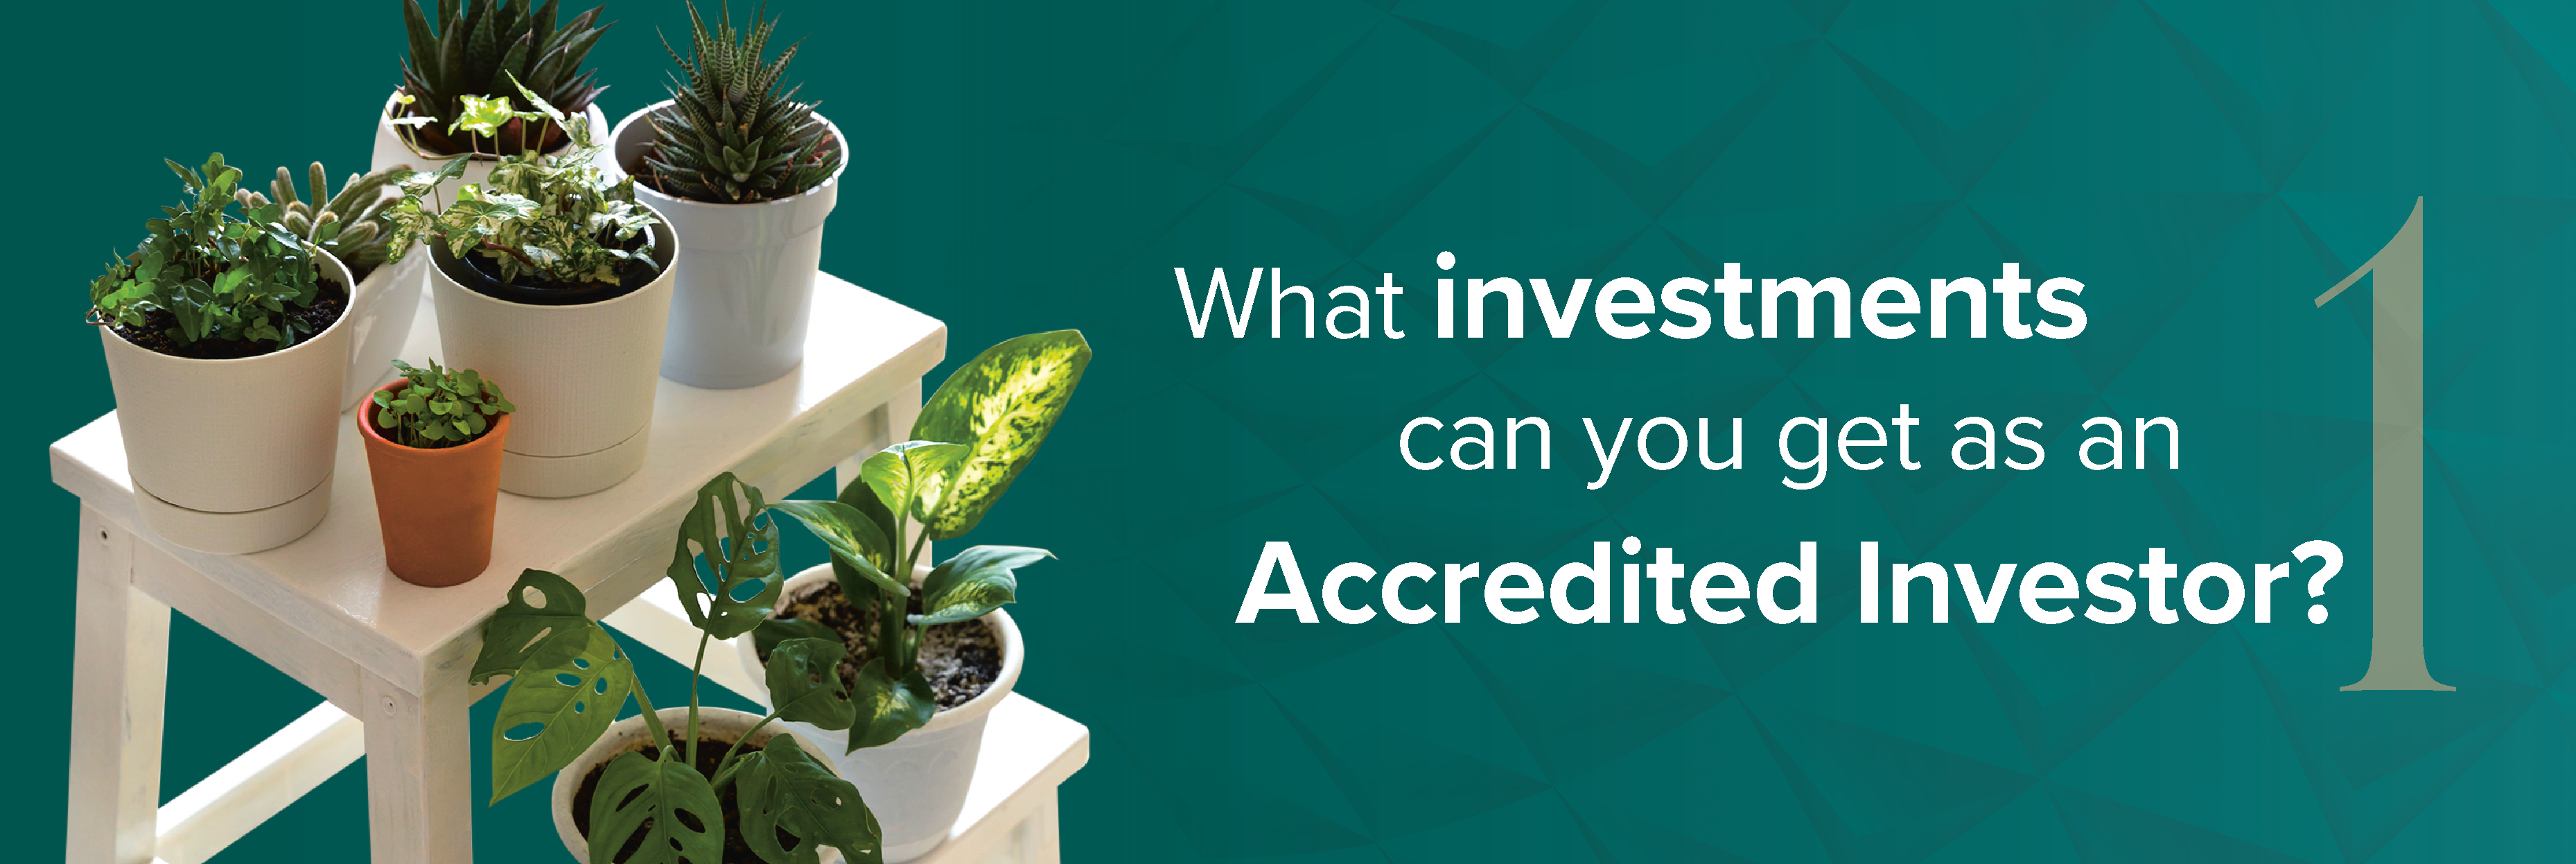 What investments can you get as an Accredited Investor